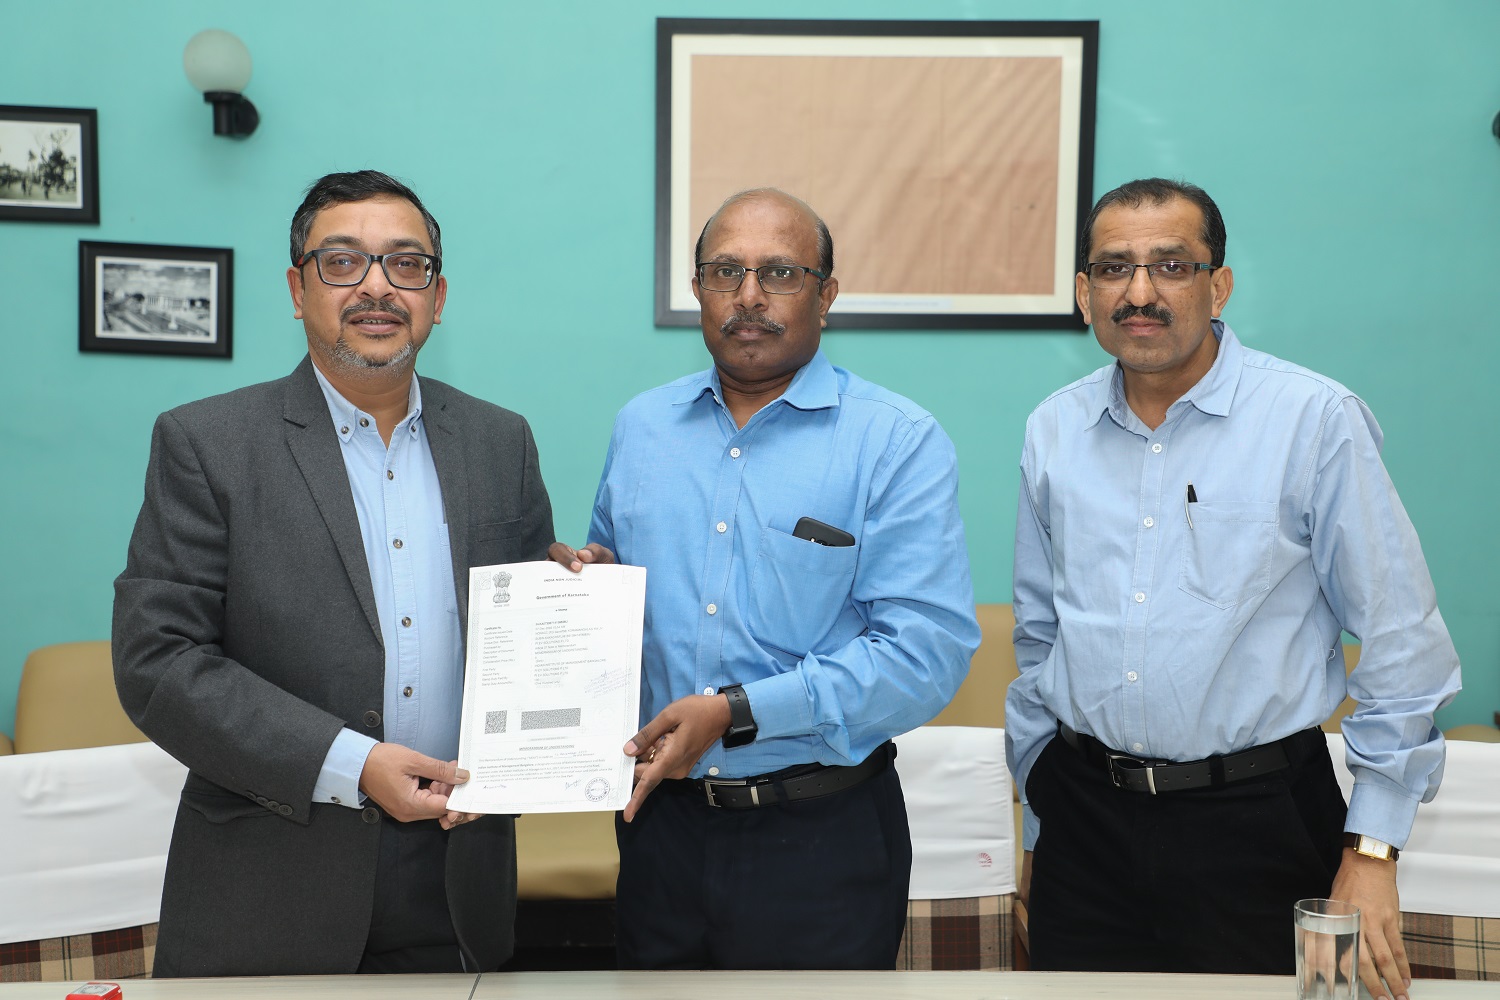 Col. (Retd.) S.D. Aravendan (centre), Chief Administrative Officer, IIMB, and Mr. Shoubhik Dasgupta (left), COO, Pi EV Solutions Pvt Ltd., an electric vehicle charging solutions provider, exchange an agreement for the installation of an EV charging station for two-wheelers and four-wheelers on campus on 12 December 2022. Mr Vasudeva M, Chief Manager, Infrastructure at IIMB, looks on.